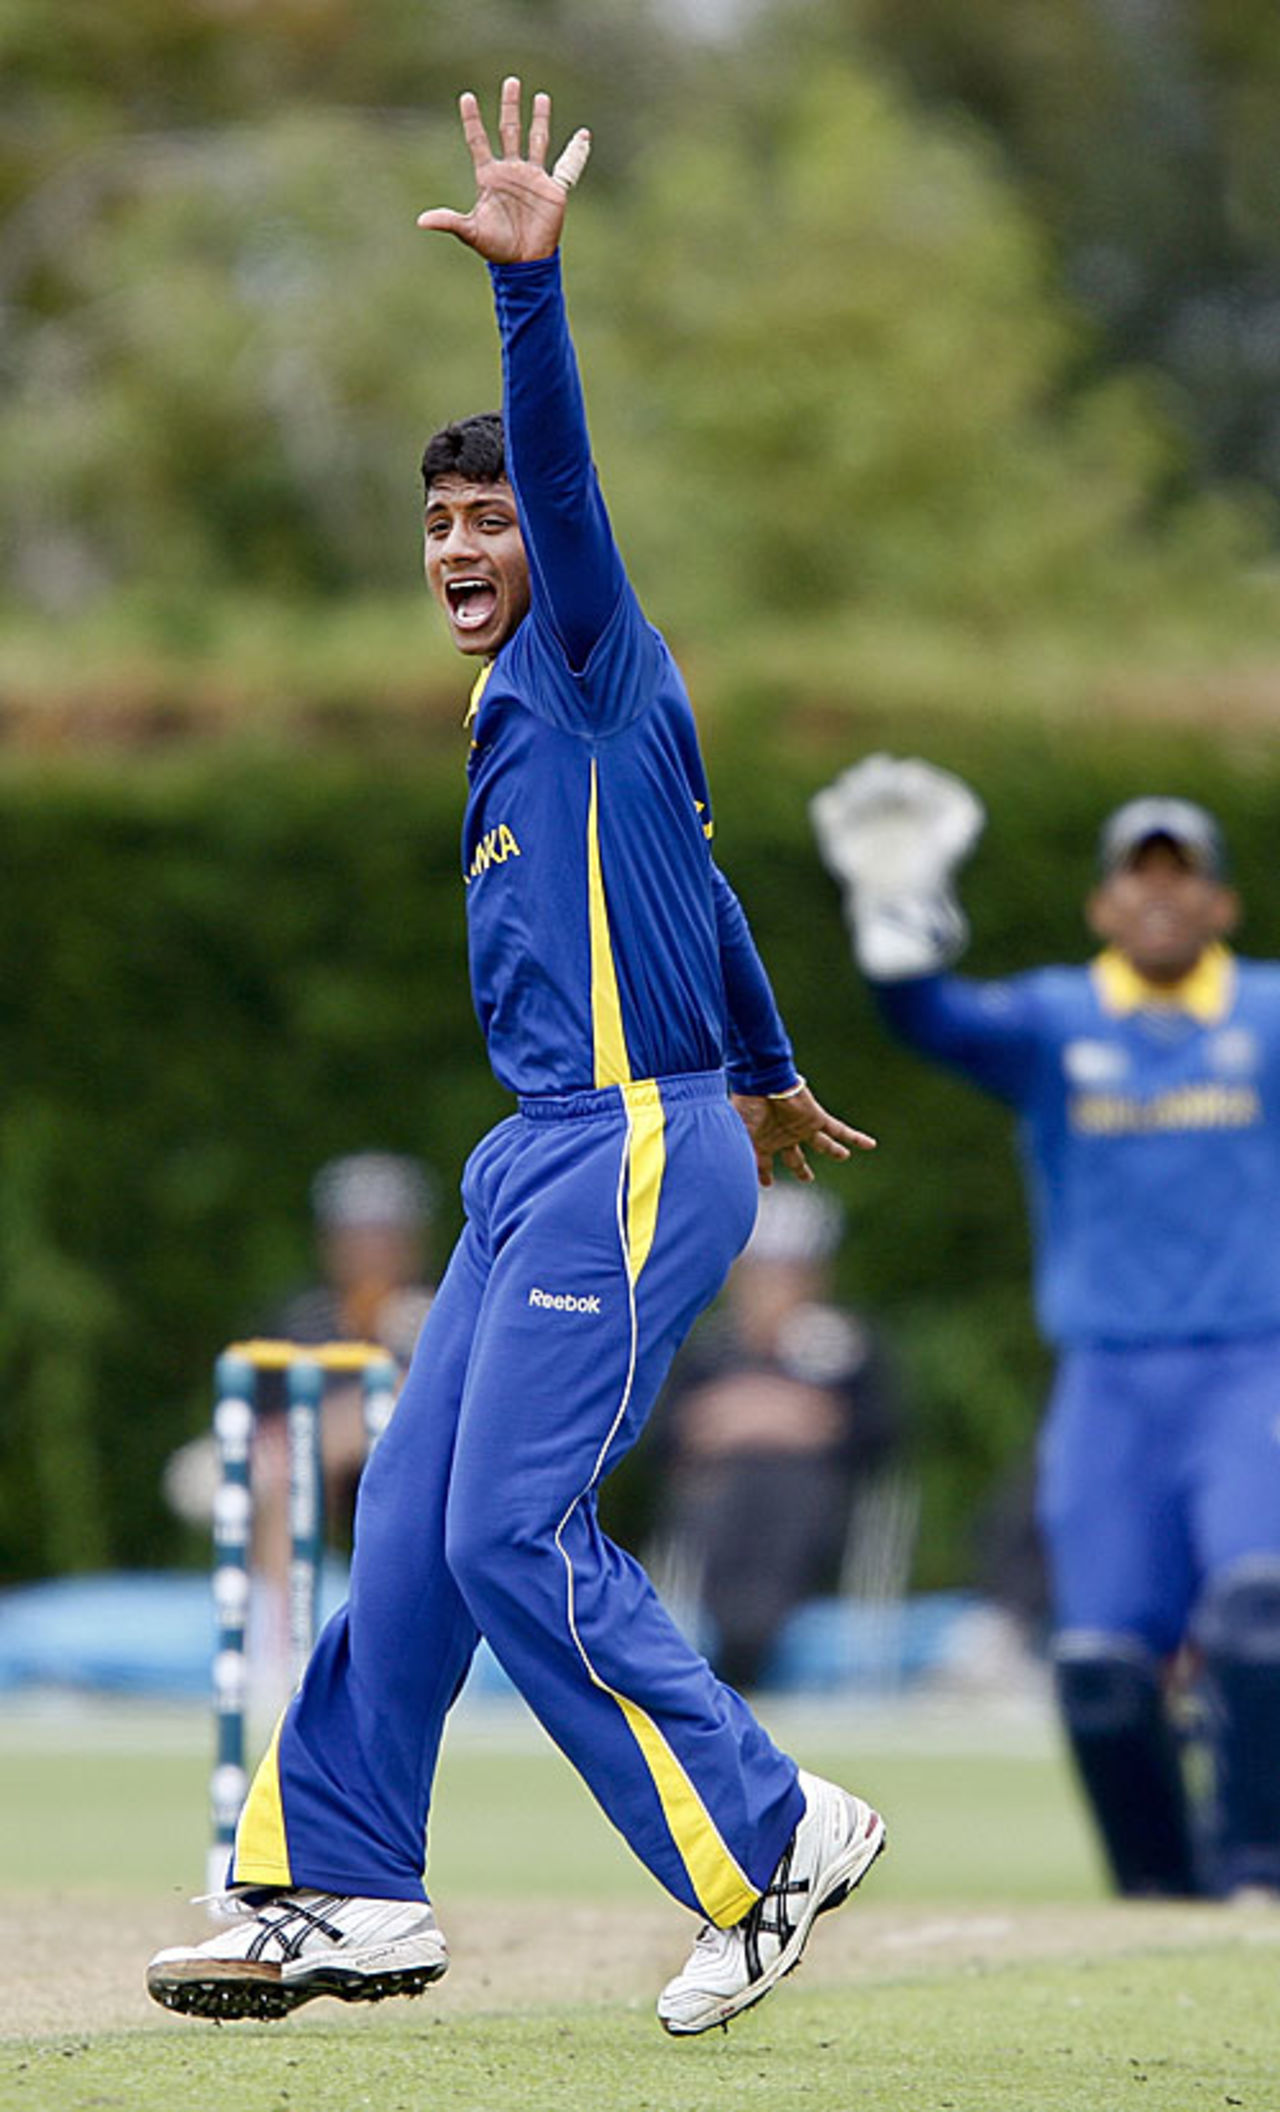 Chathura Peiris appeals for a wicket, Canada Under-19s v Sri Lanka Under-19s, 14th Match, Group C, ICC Under-19 World Cup, Lincoln, January 18, 2010